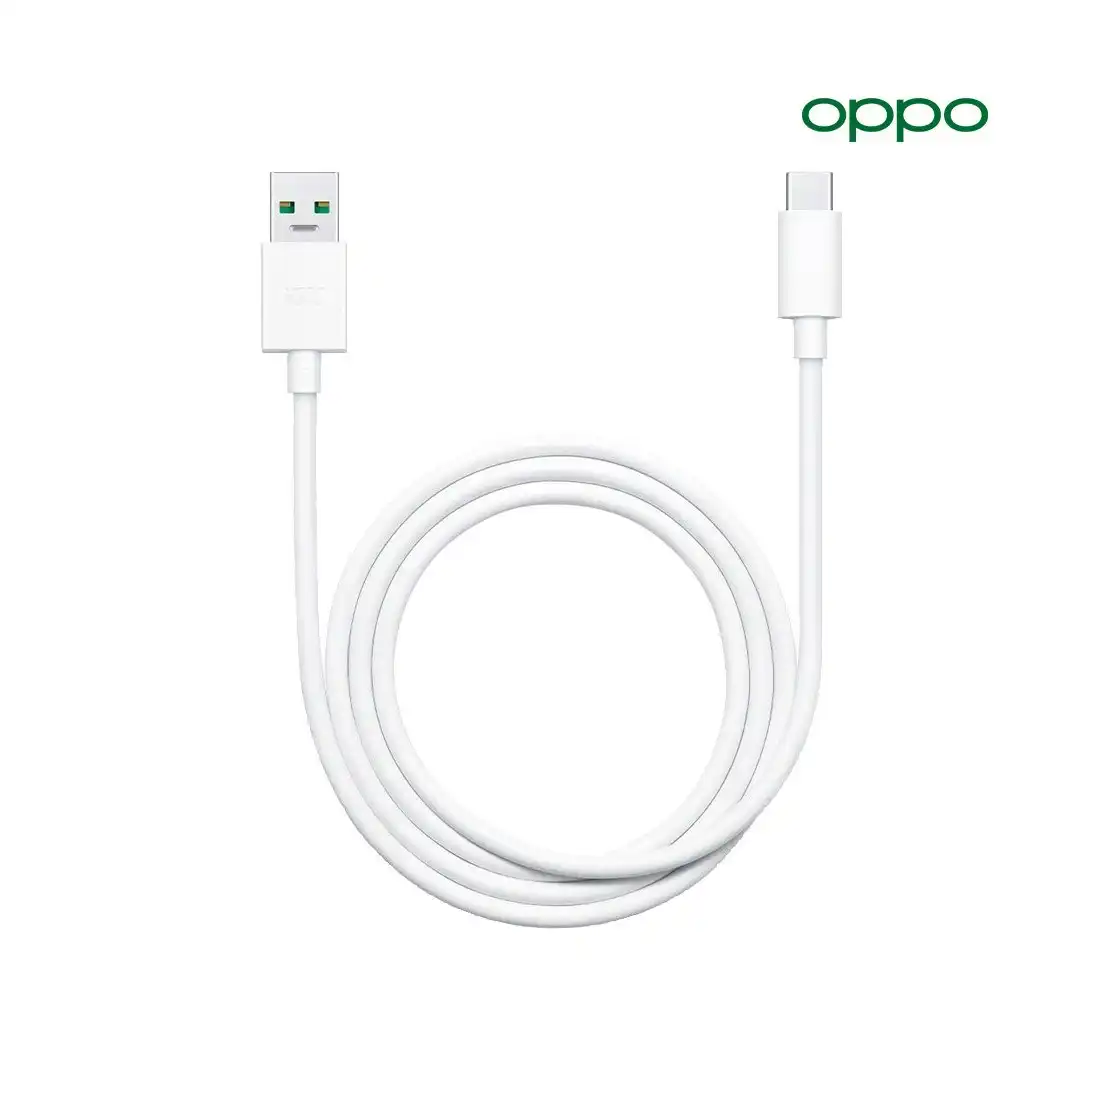 Oppo VOOC USB-C Cable DL129 - White